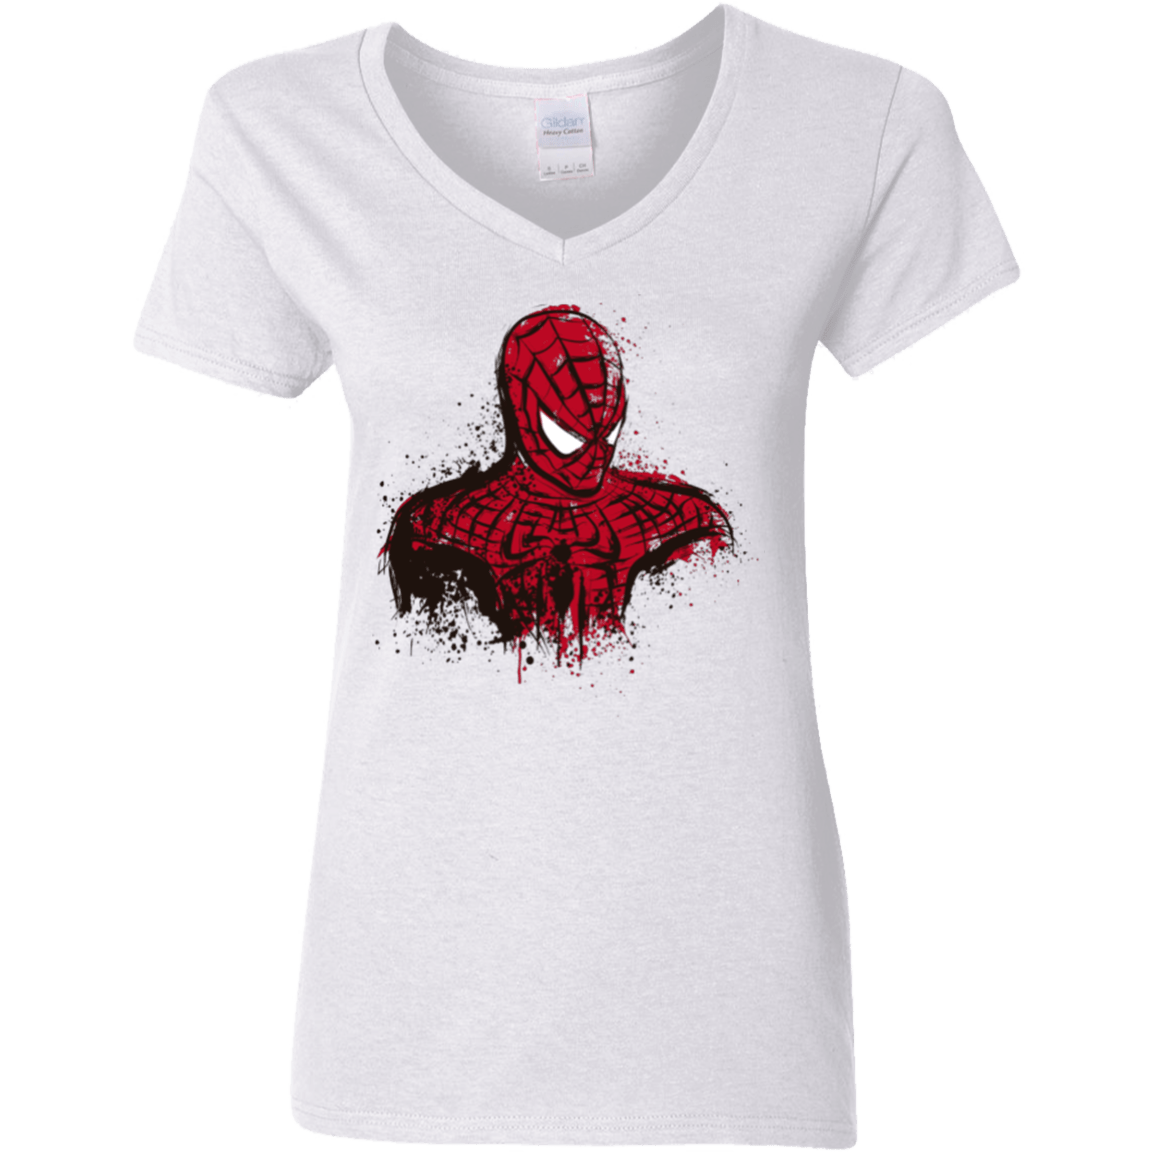 T-Shirts White / S Behind the Mask Women's V-Neck T-Shirt